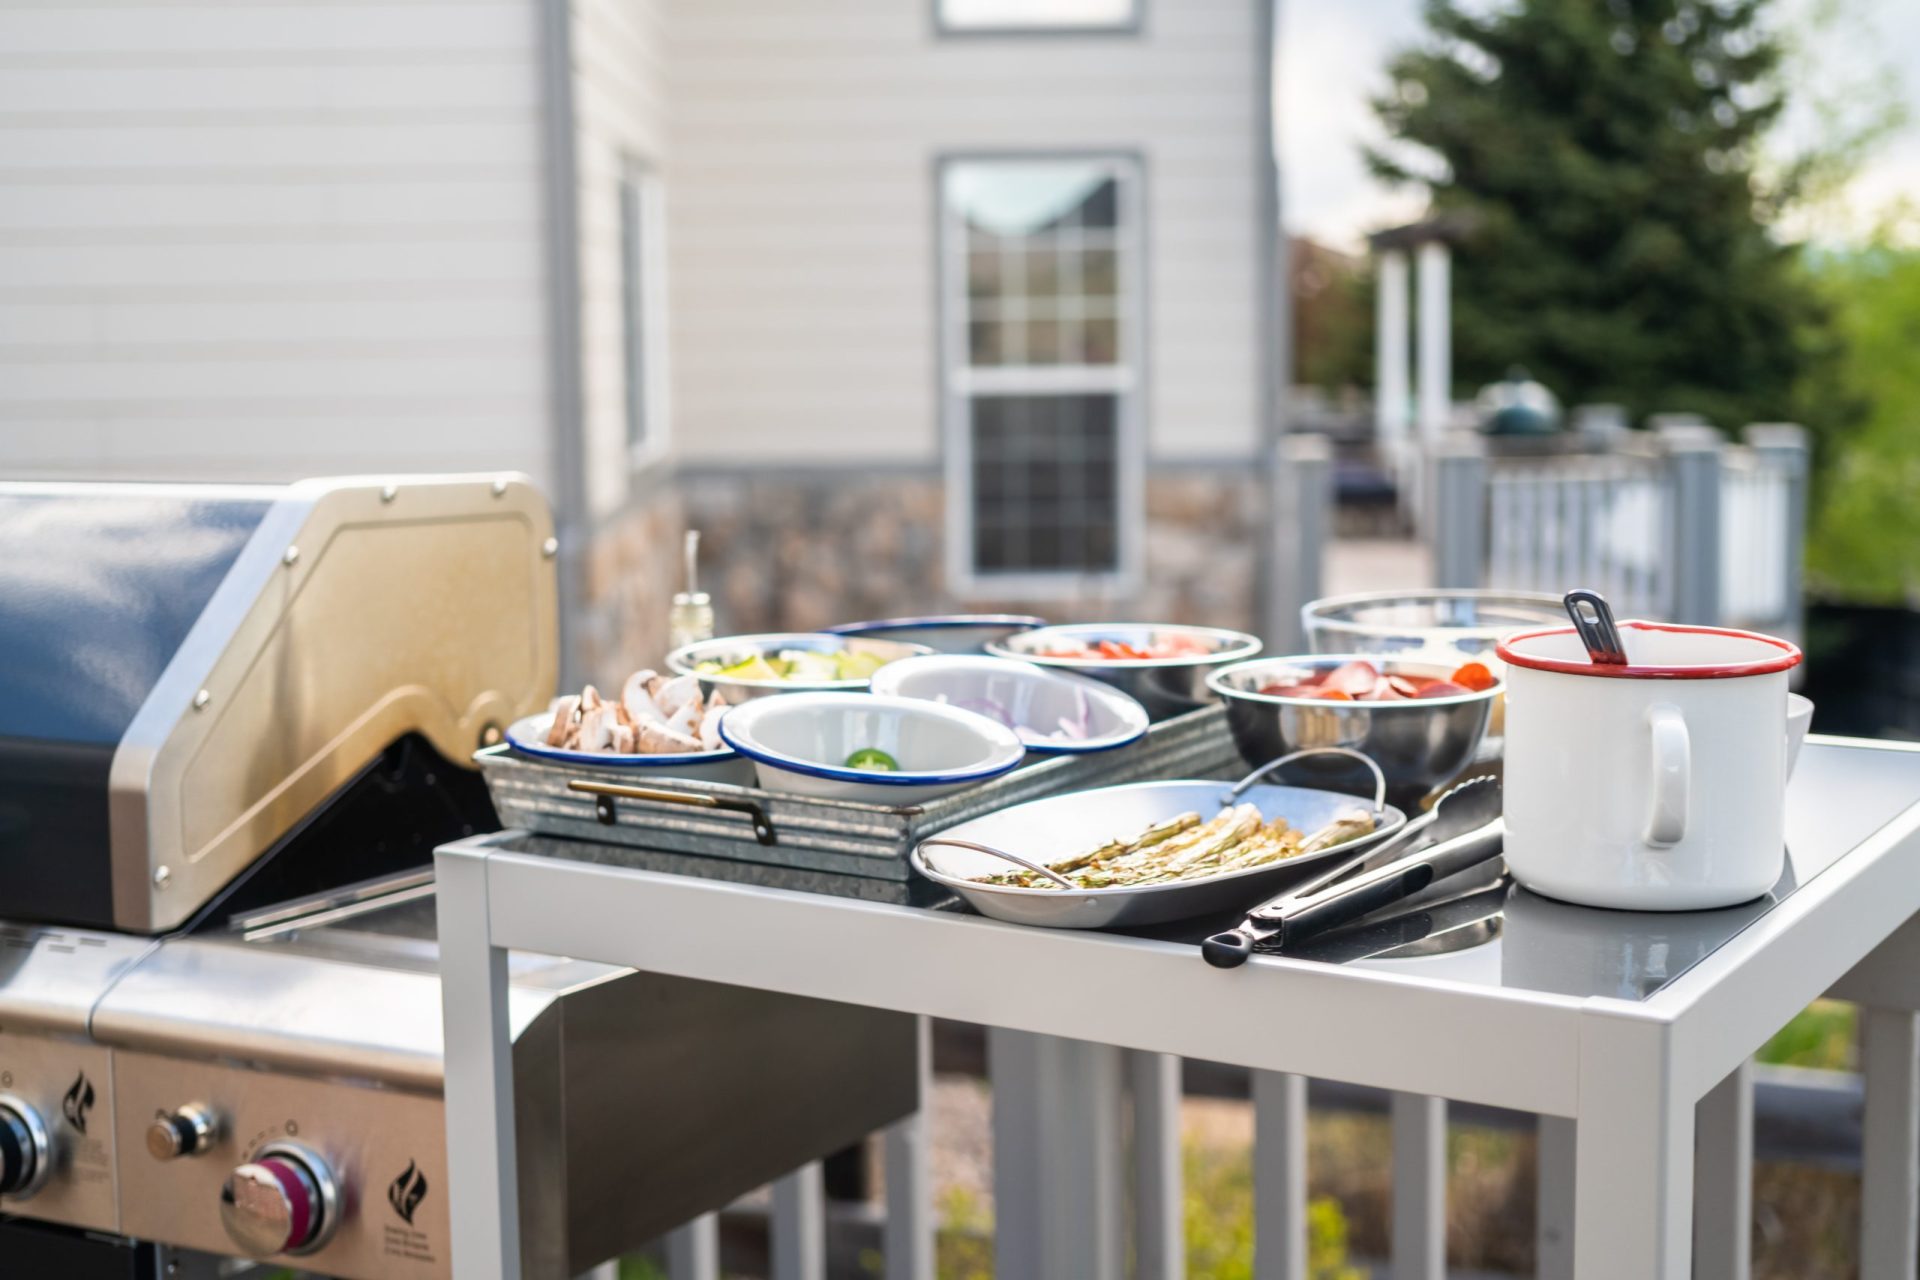 Outdoor Kitchens – Adding Value to Your Home